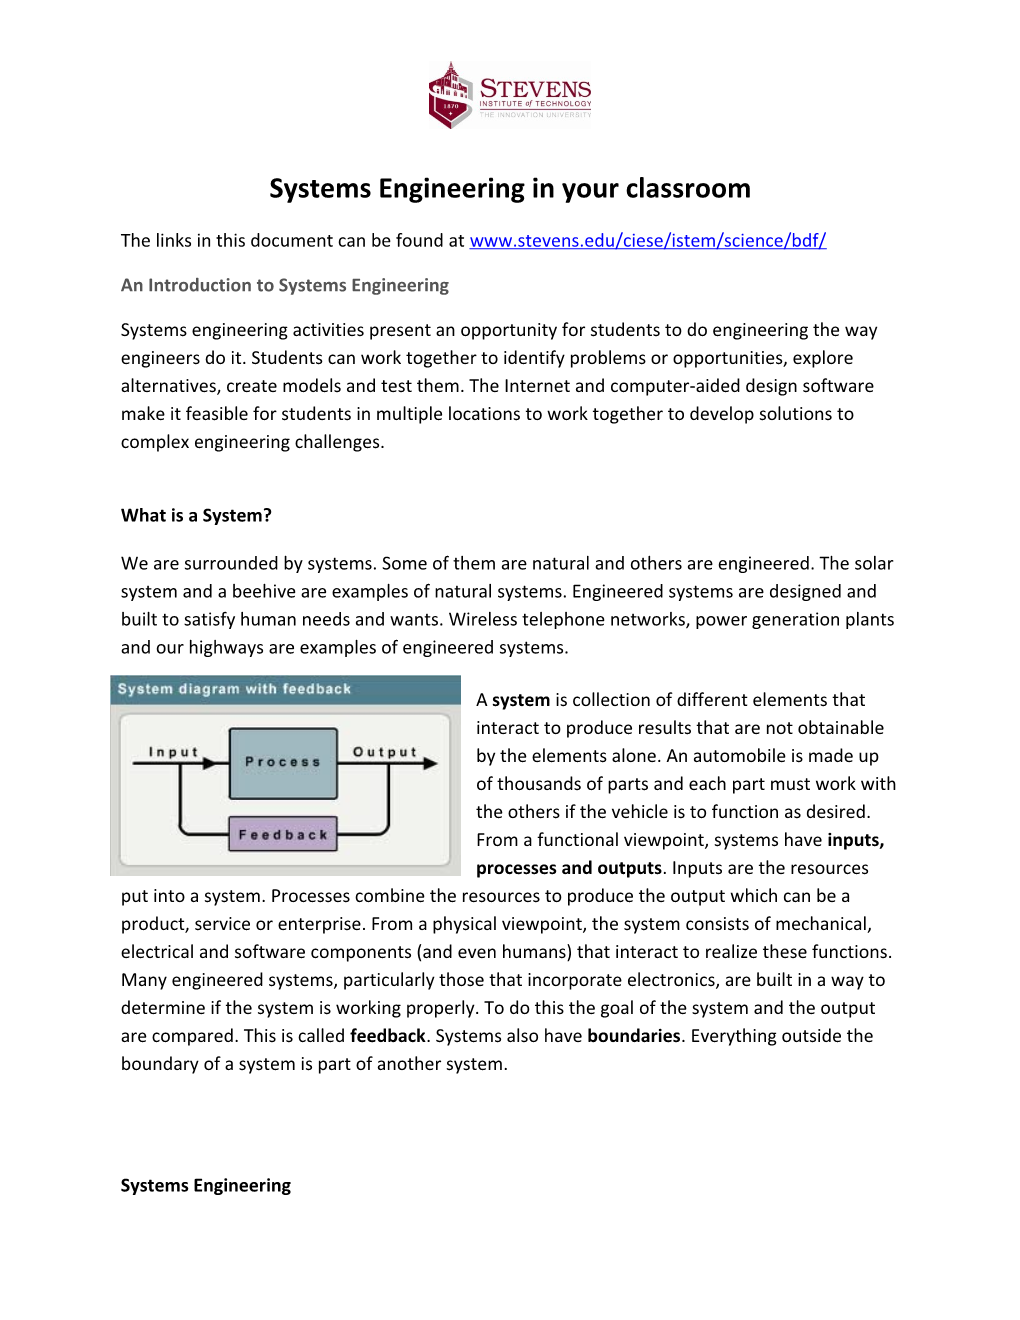 Systems Engineering in Your Classroom